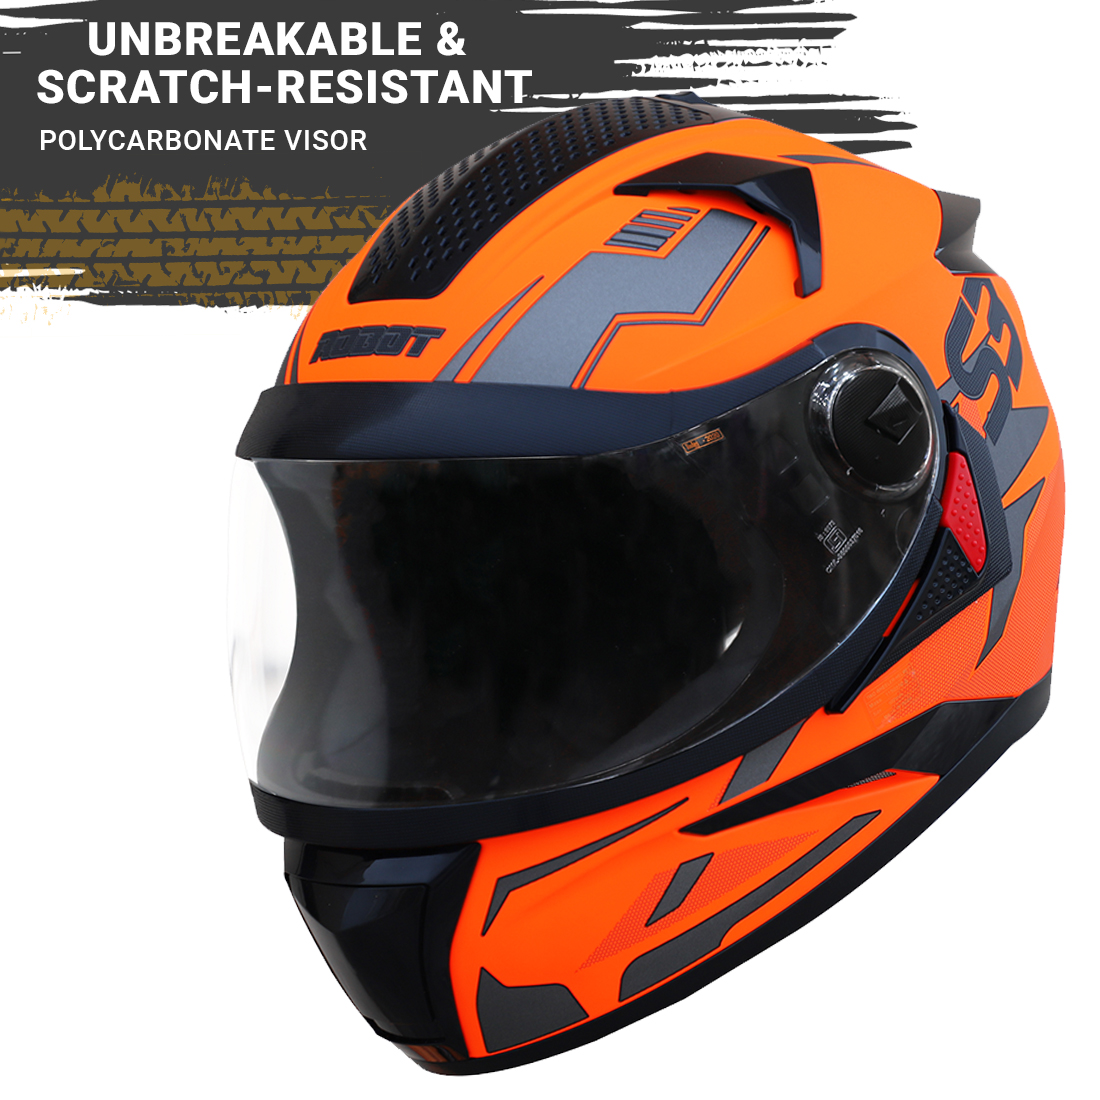 Steelbird SBH-17 Terminator ISI Certified Full Face Graphic Helmet (Glossy Fluo Orange Grey With Clear Visor)